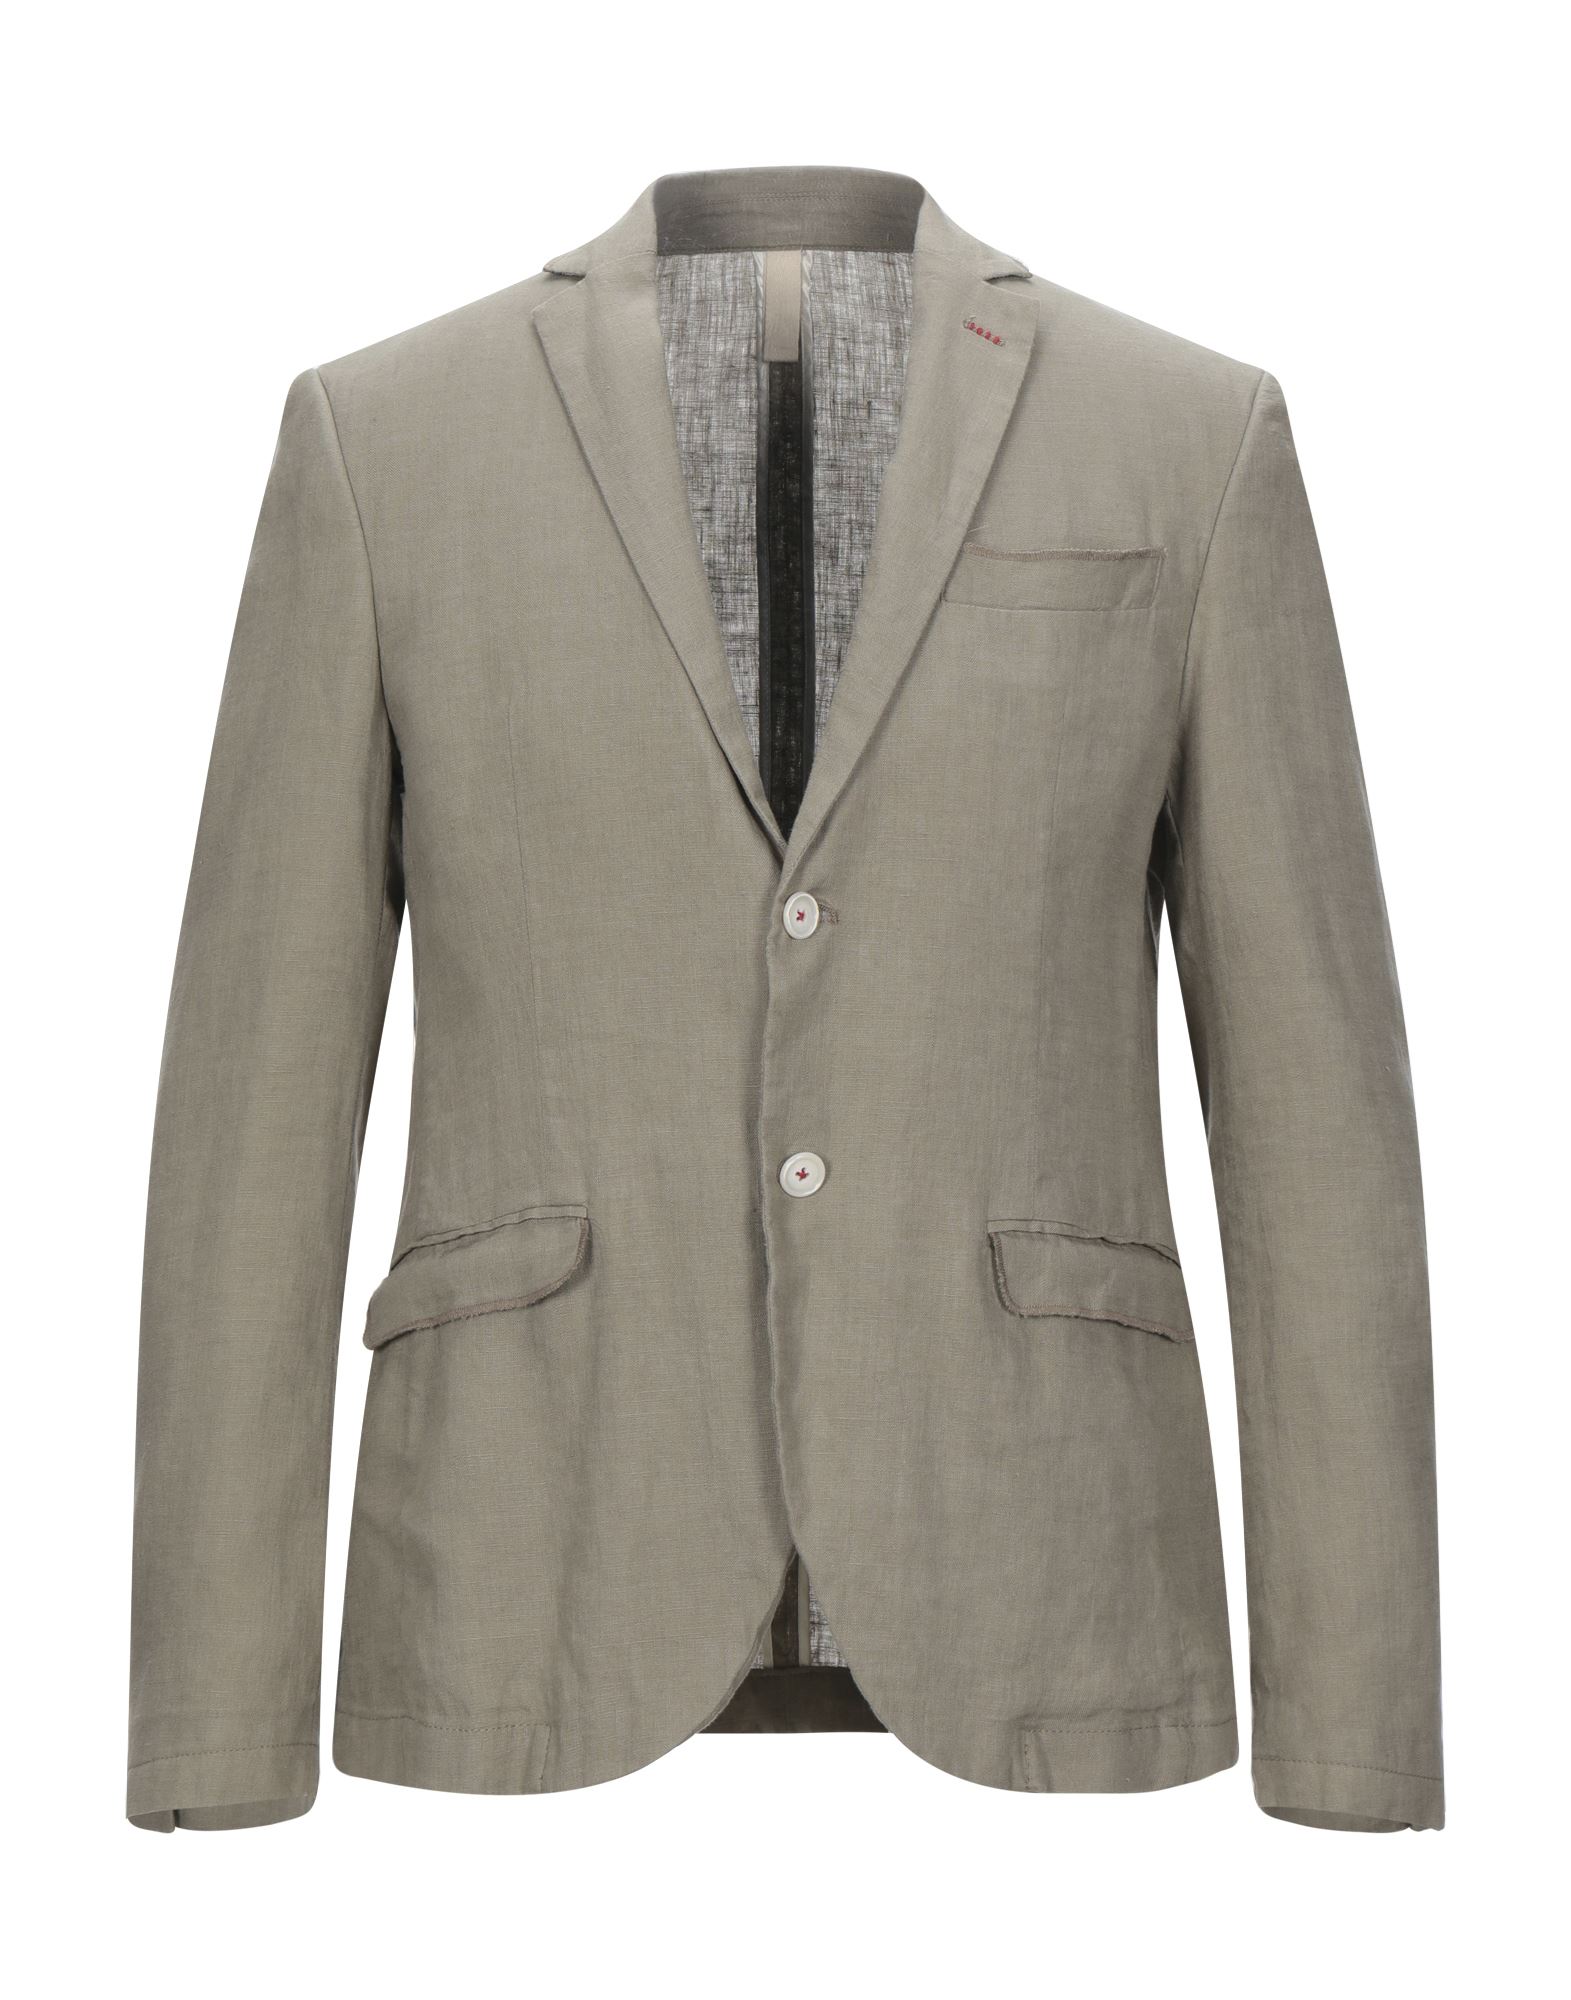 ALTATENSIONE Suit jackets